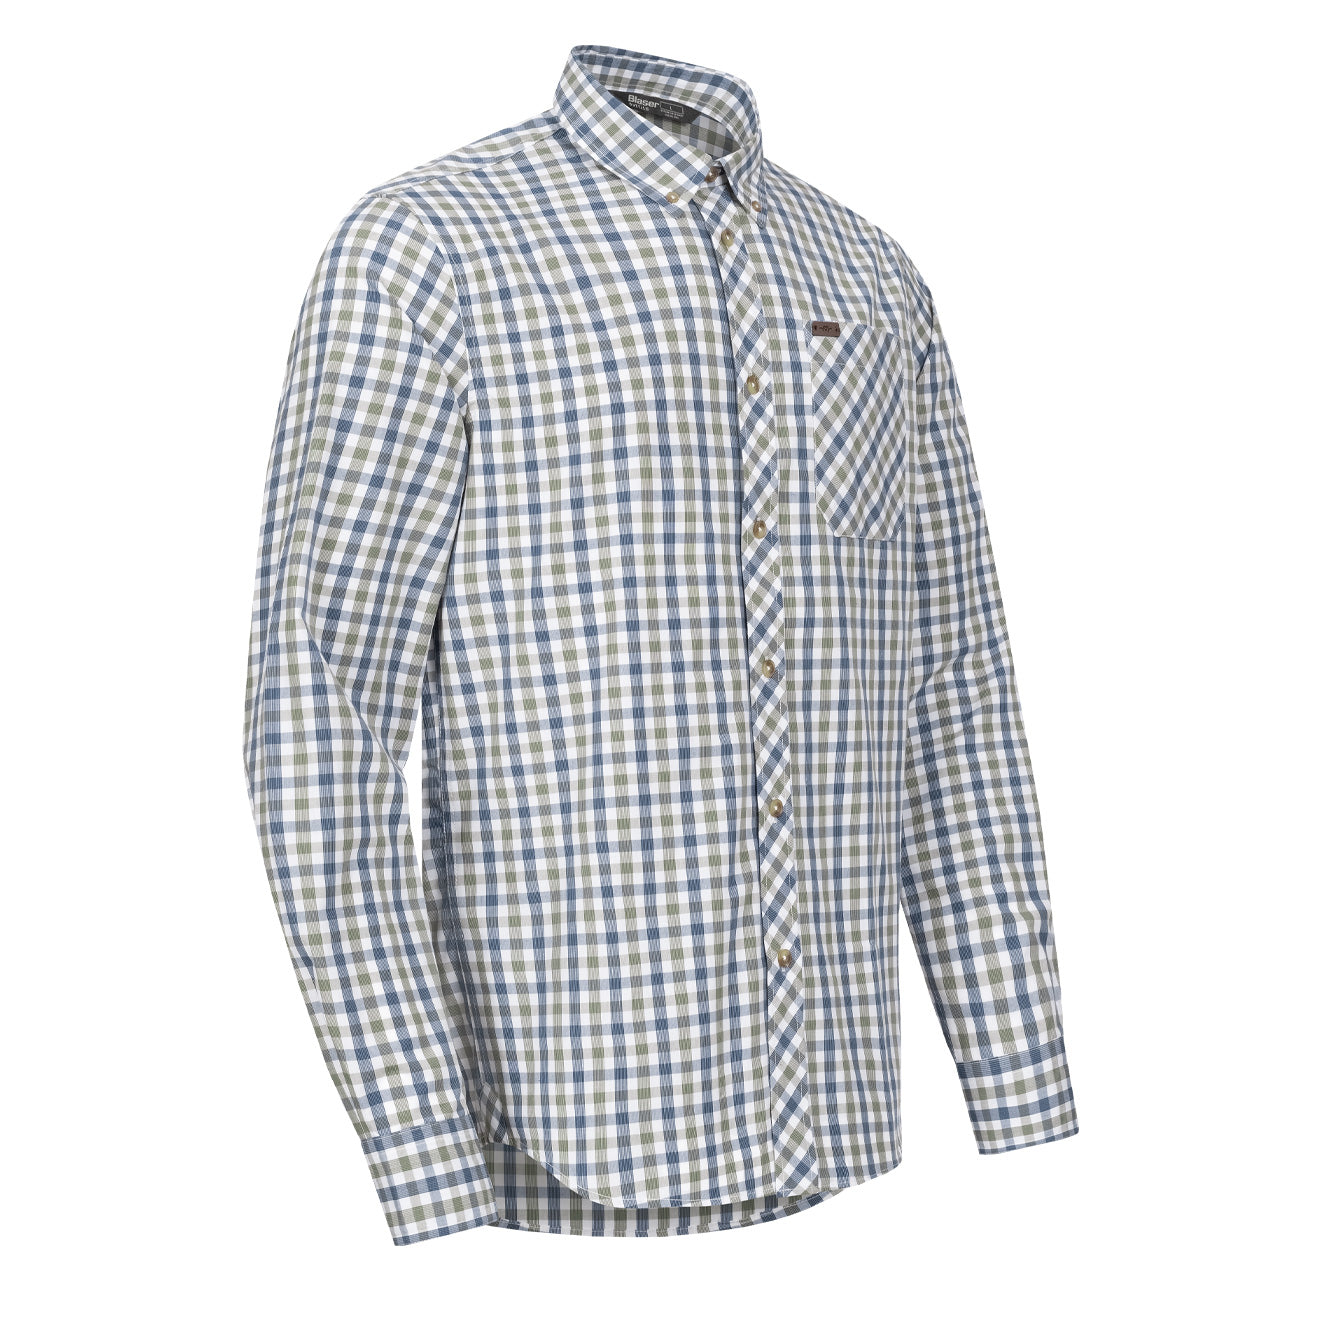 Blaser Juno Check Shirt Olive / Blue | The Sporting Lodge